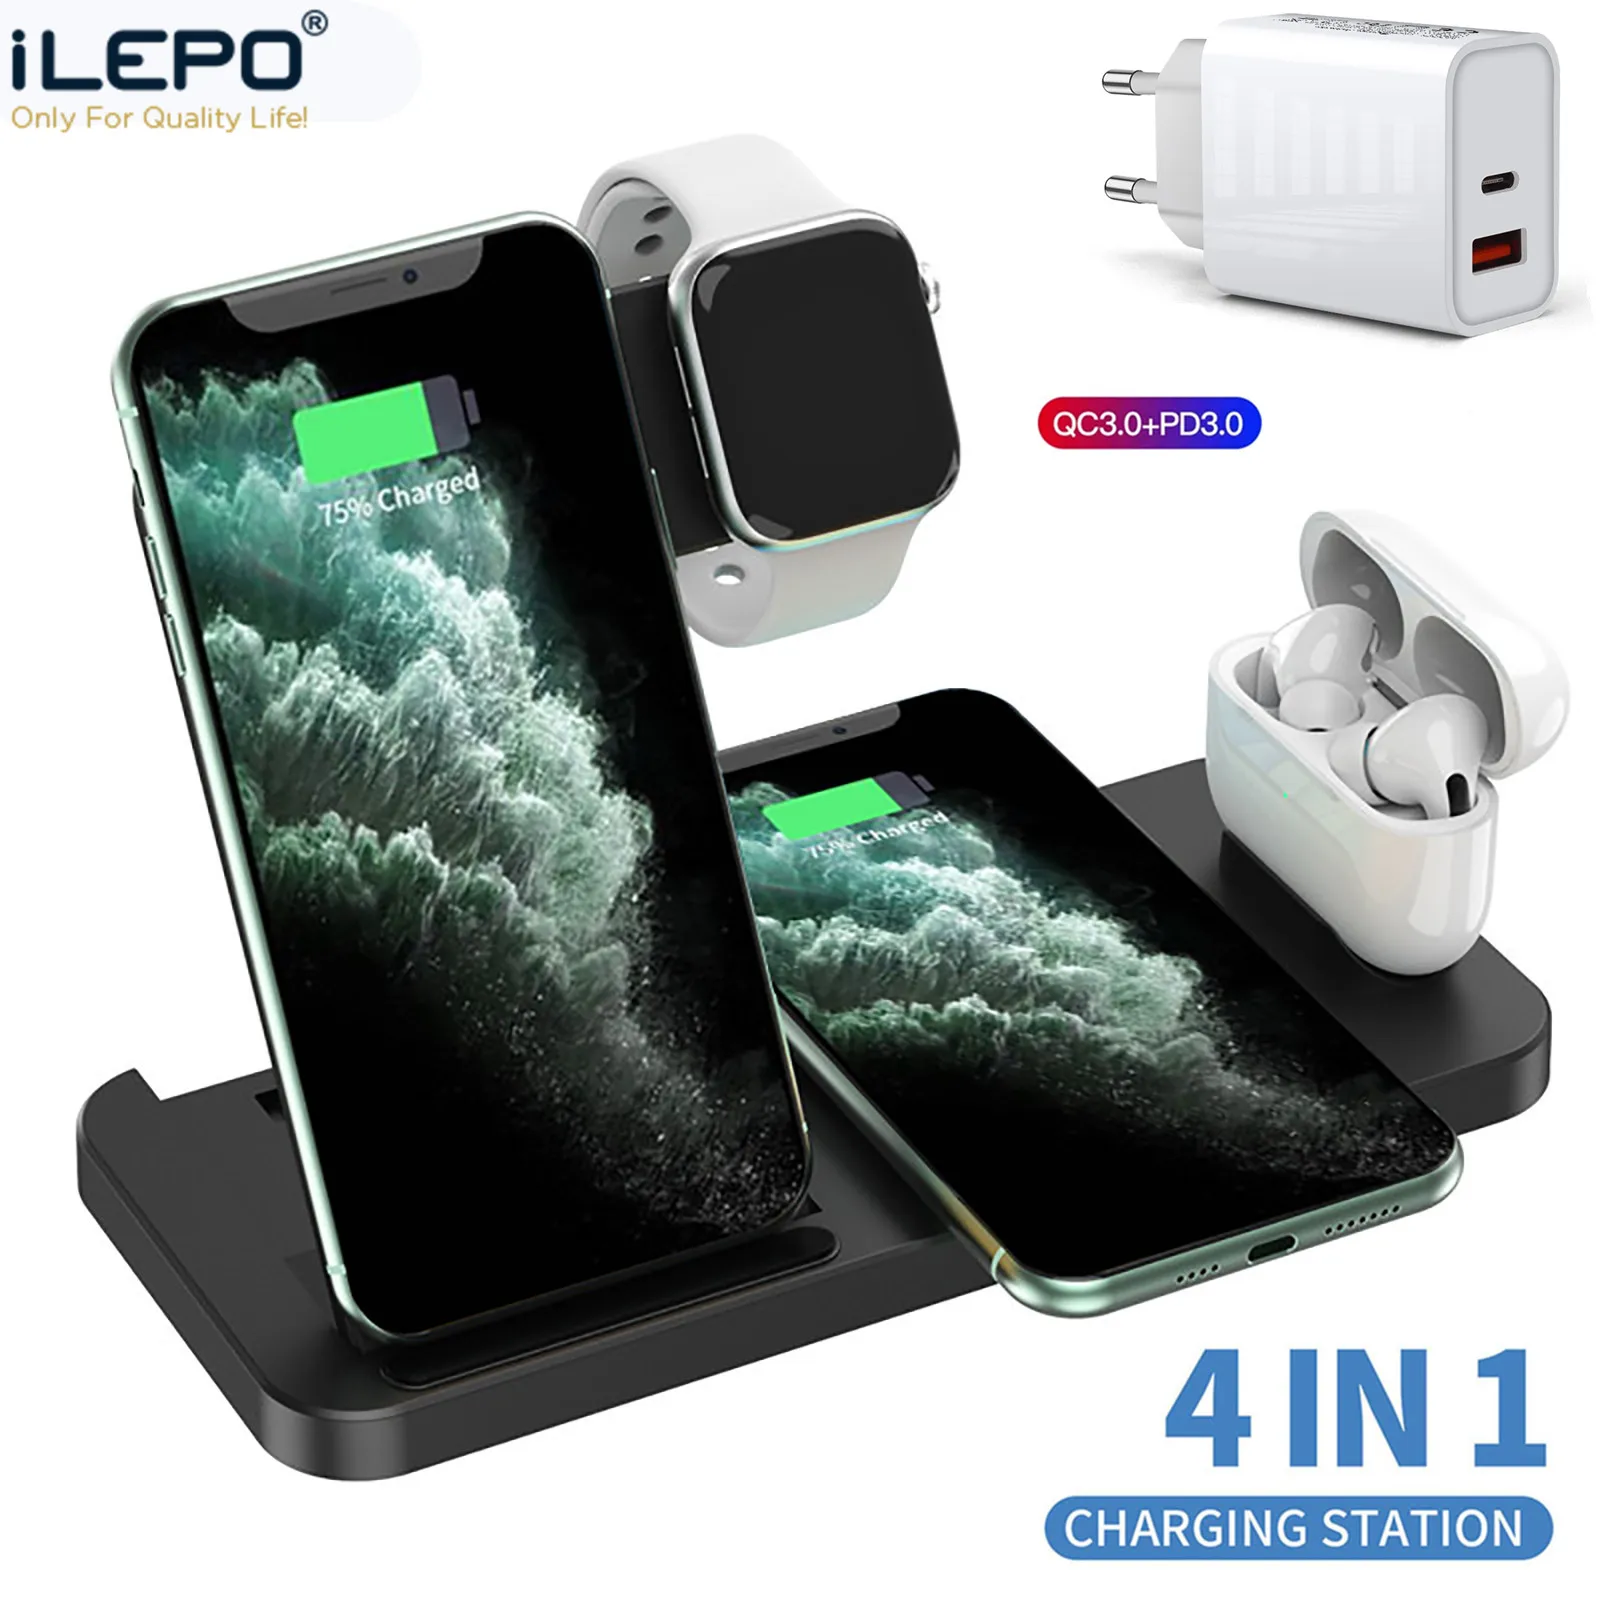 

4 in 1 Wireless Charger 15W Fast Charging for iPhone 12 11 XS XR X 8 Samsung For Apple Watch 6 5 4 3 AirPods Pro QC 3.0 Adapter